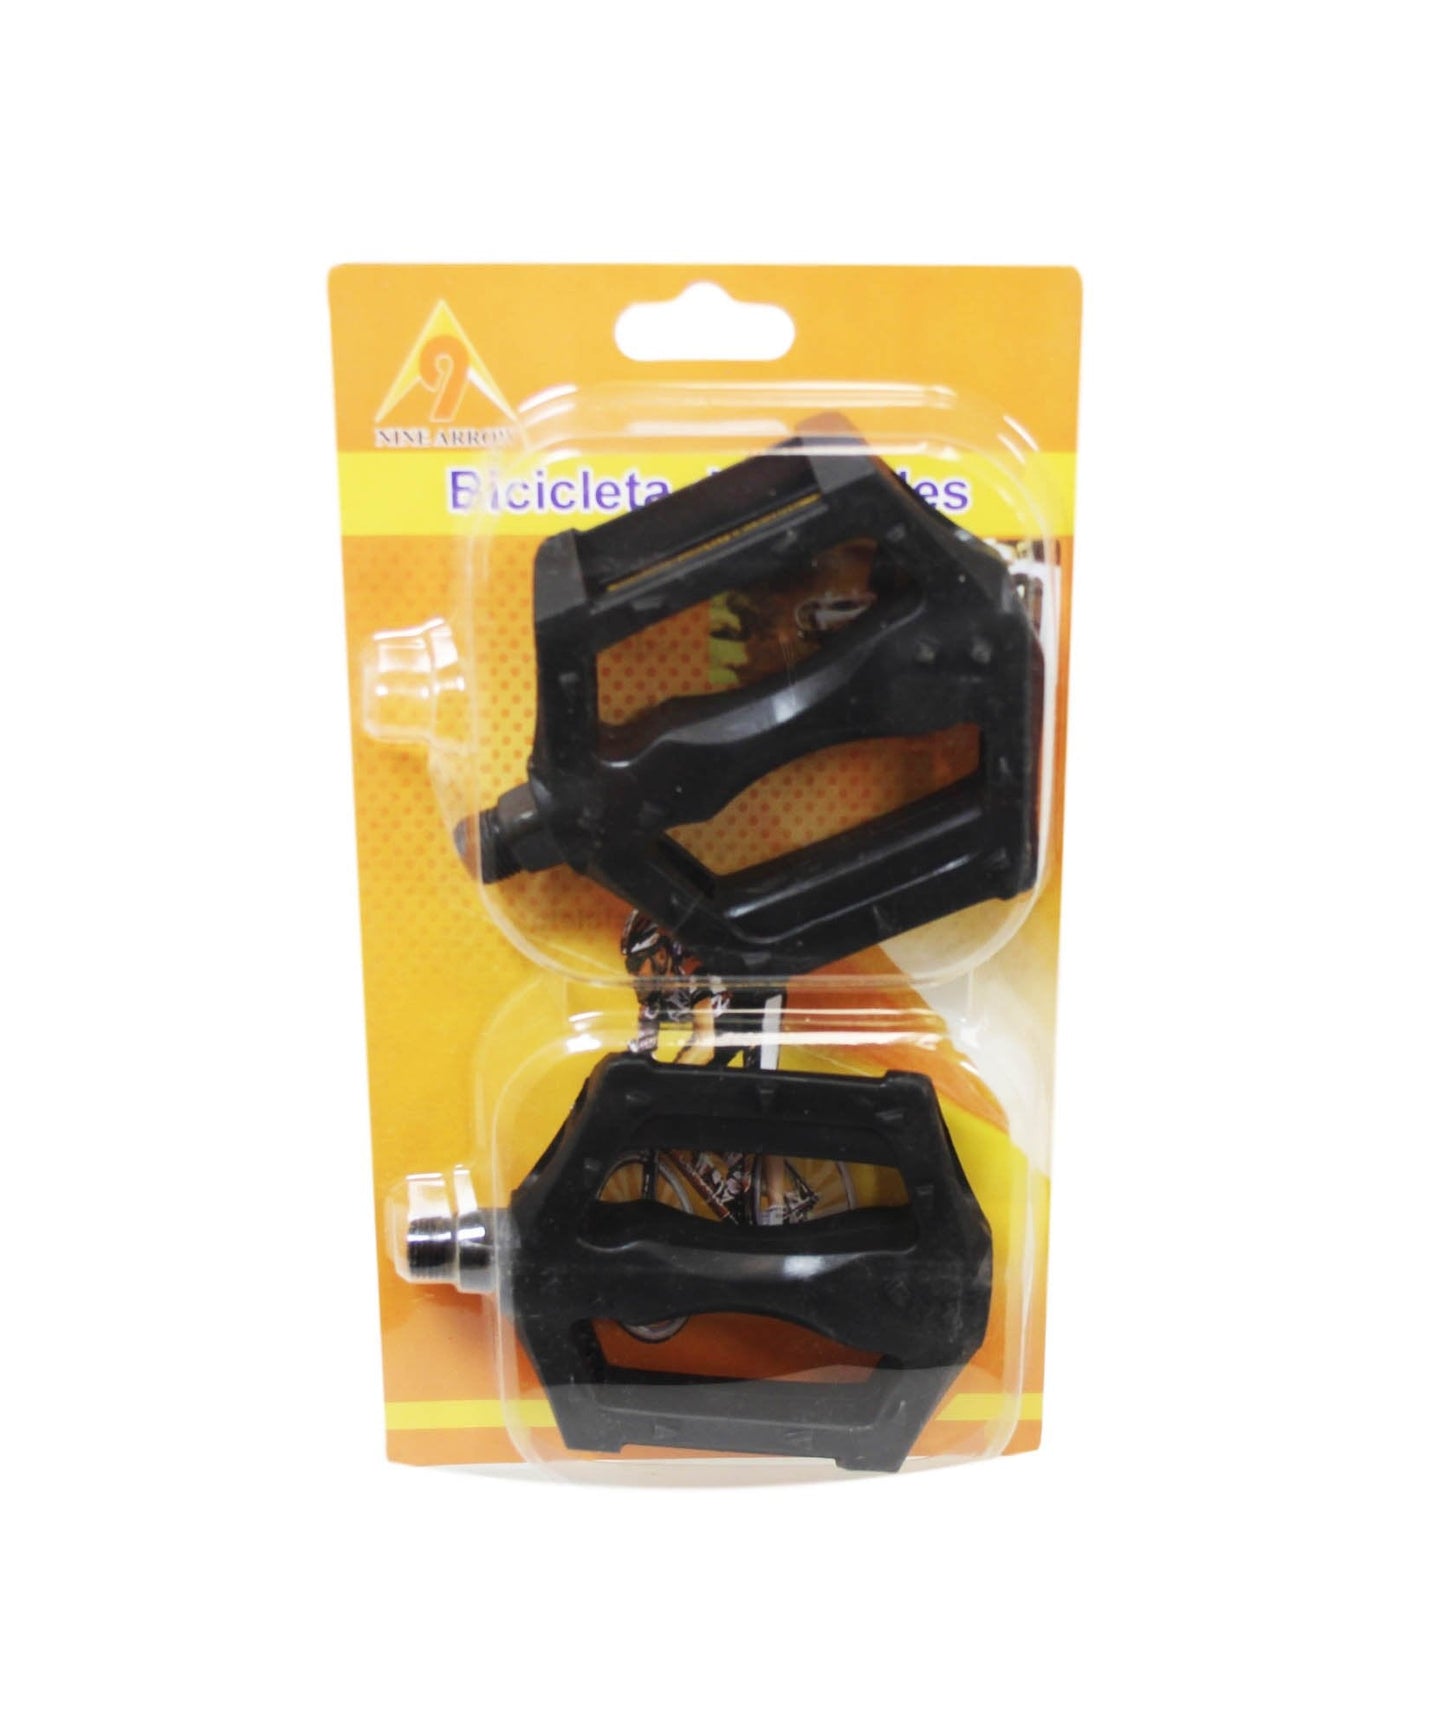 Standard Bike Pedals Plastic Bicycle Pedals With Reflective Safety Strip 10 x 8cm 1853 (Parcel Rate)